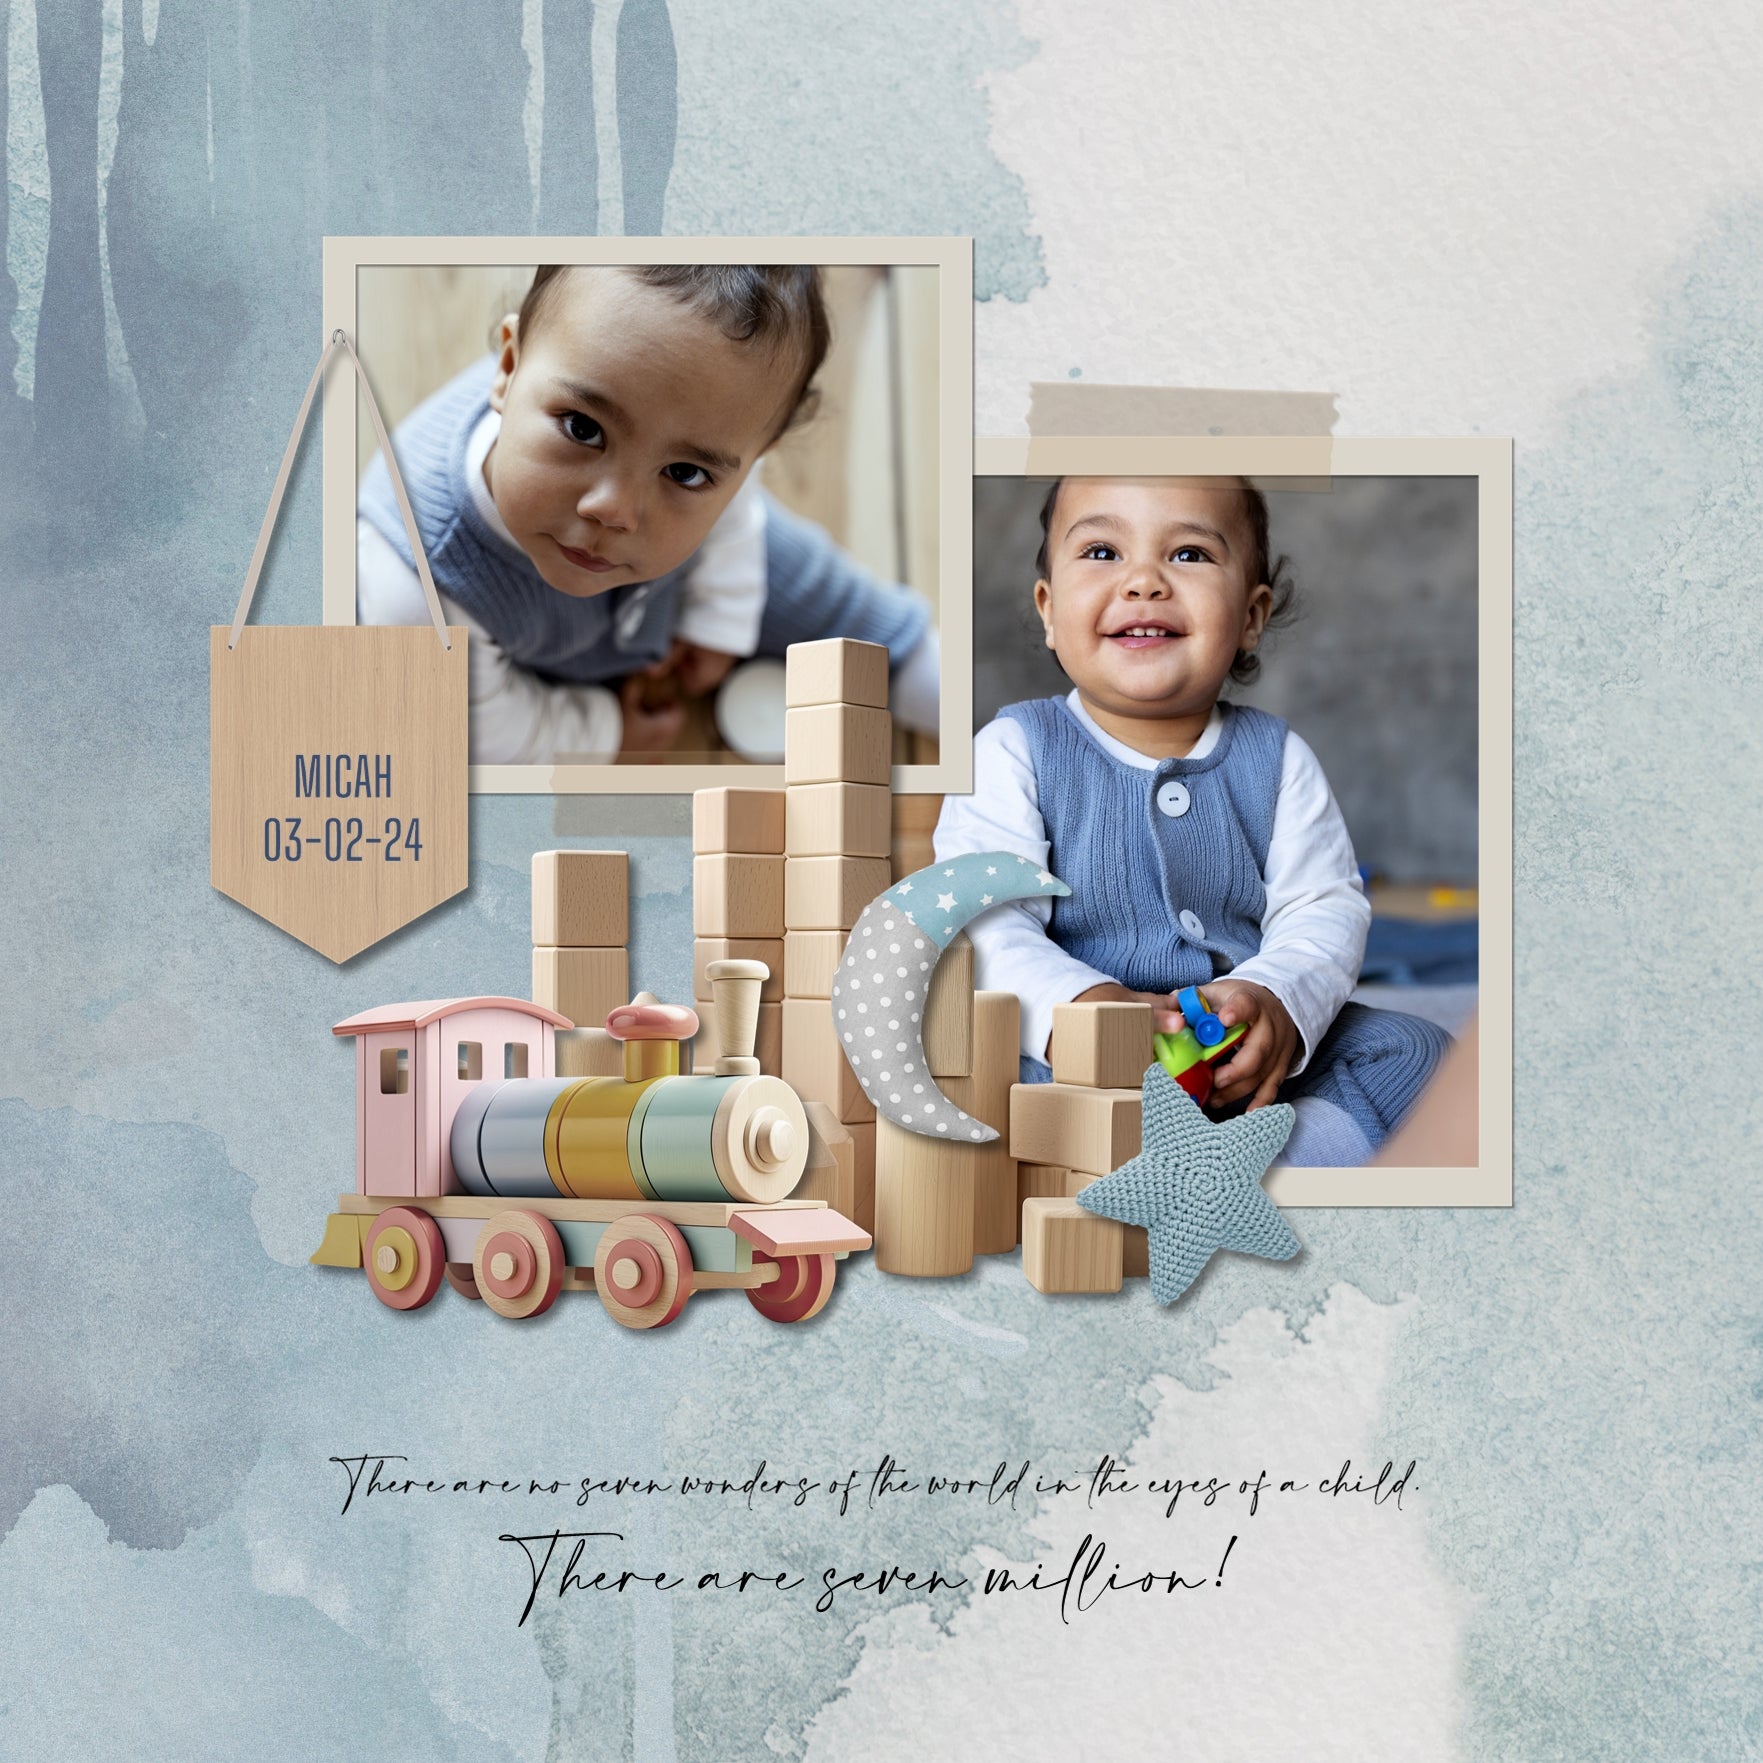 Capture the special moments of your baby through the toddler years with these pastel children's toy digital scrapbooking embellishments by Lucky Girl Creative digital art. Create unique baby announcements, baby shower gifts, and even Baby's 1st Year, ABC books, and toddler albums. Elements include abacus, scooter, bike, puzzle, rocking horse, rubber duck, teddy bear, top, bear, wooden blocks, wood toys, car, cat, caterpillar, dog, giraffe, toy train, and xylophone.